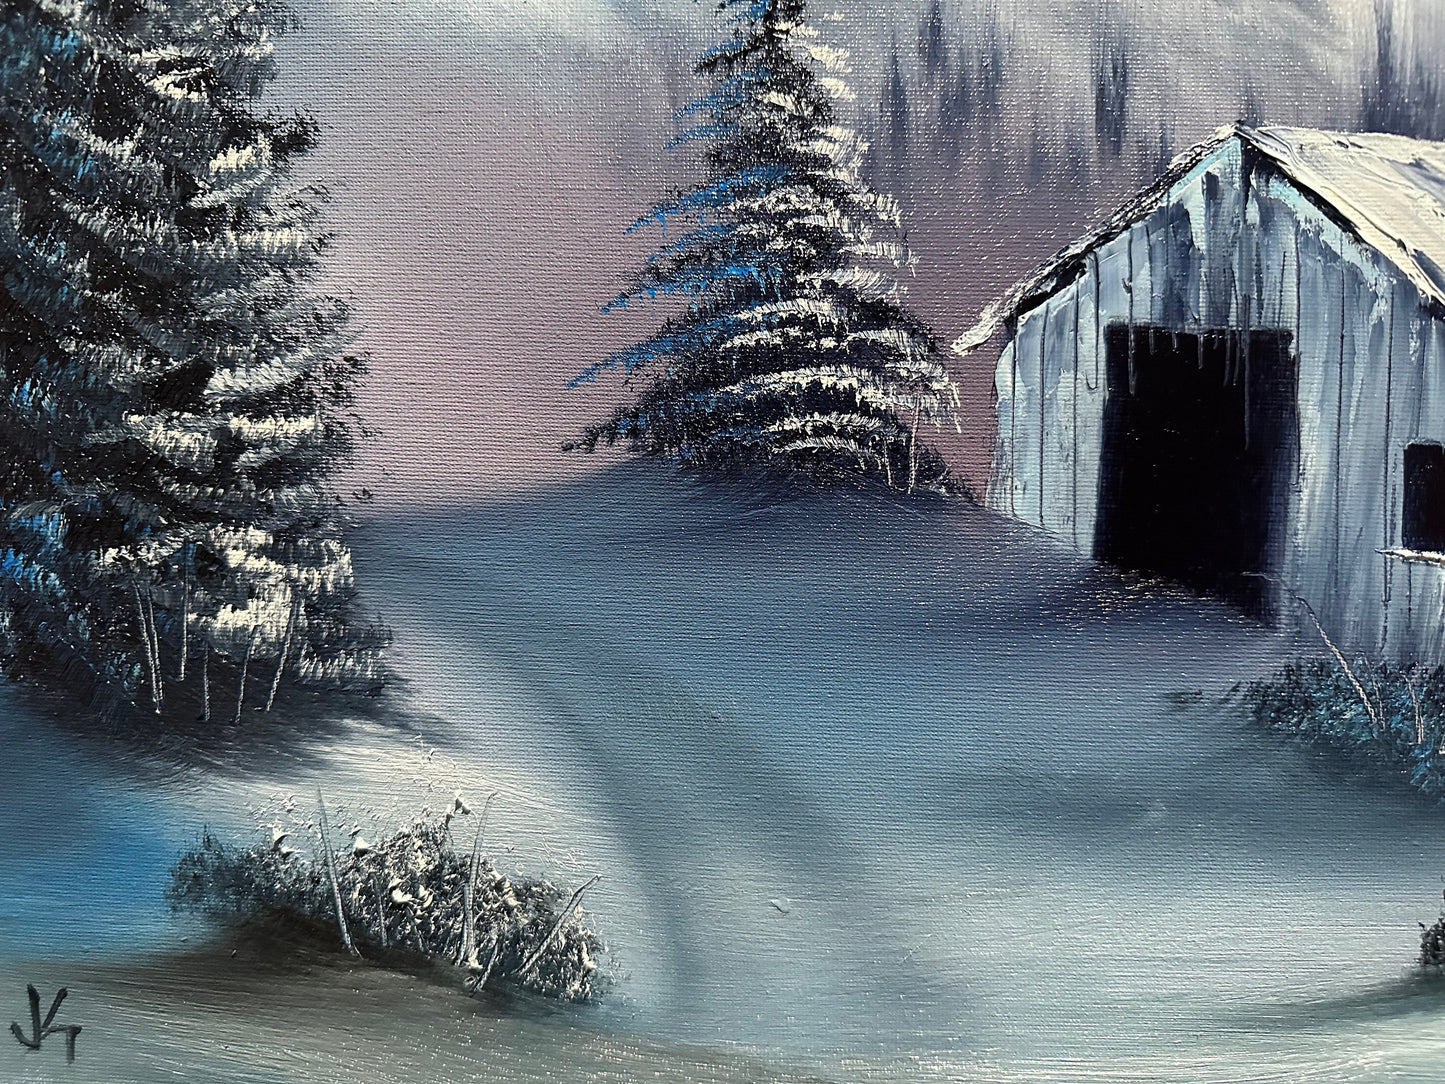 Painting 996 - 16x20" Canvas - Winter Landscape painted Live on TikTok on 10/29/23 by PaintWithJosh